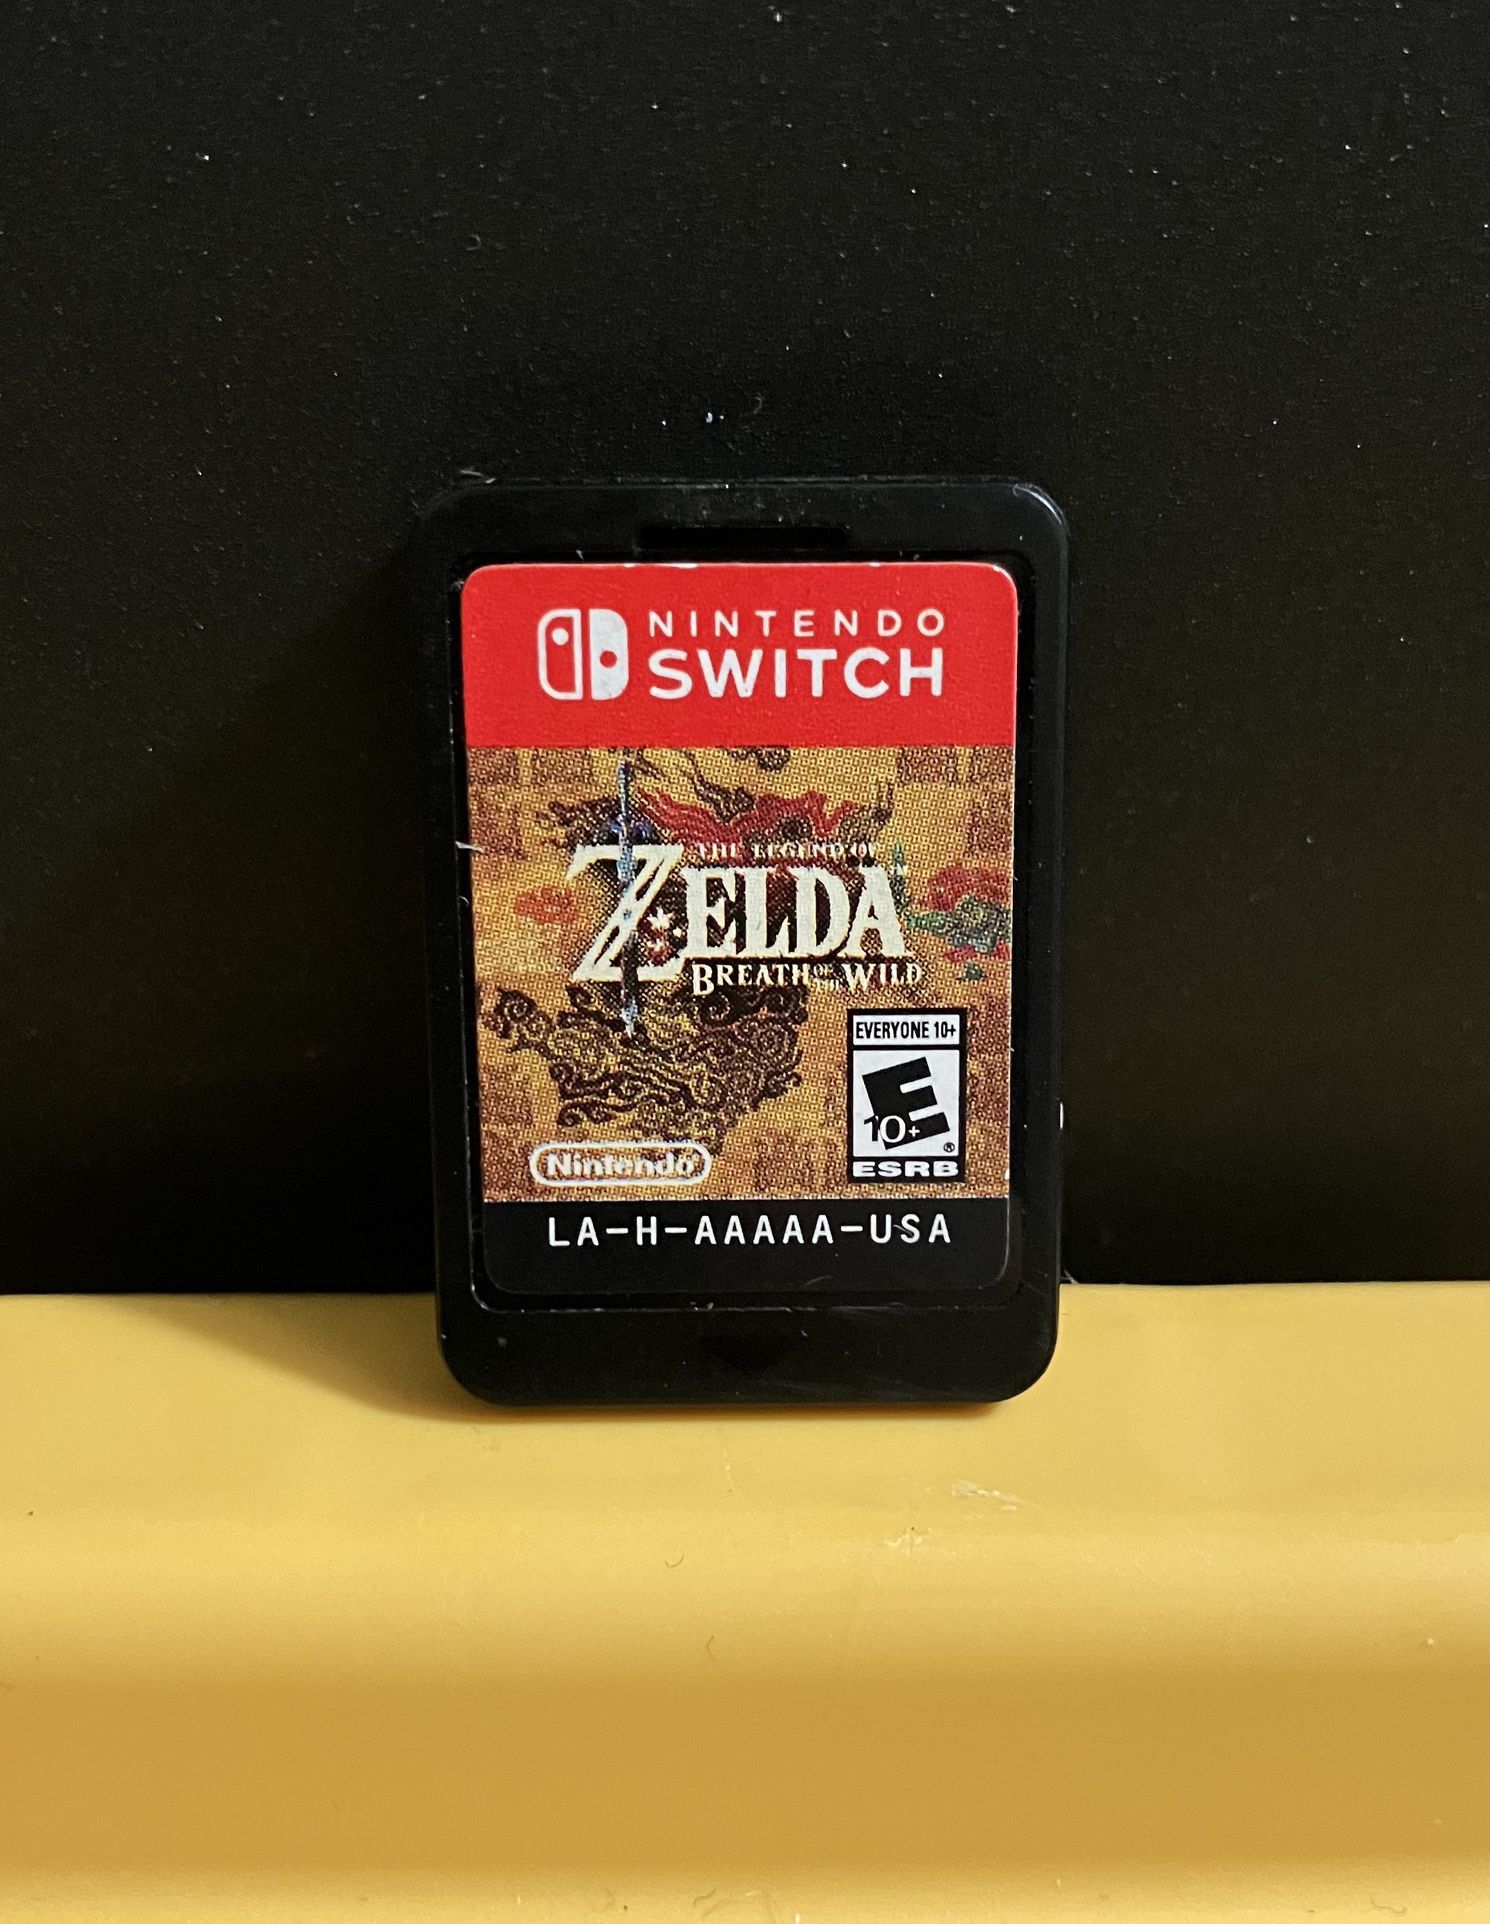 The Legend Of Zelda Breath Of The Wild for Nintendo Switch system BotW video game or OLED Lite